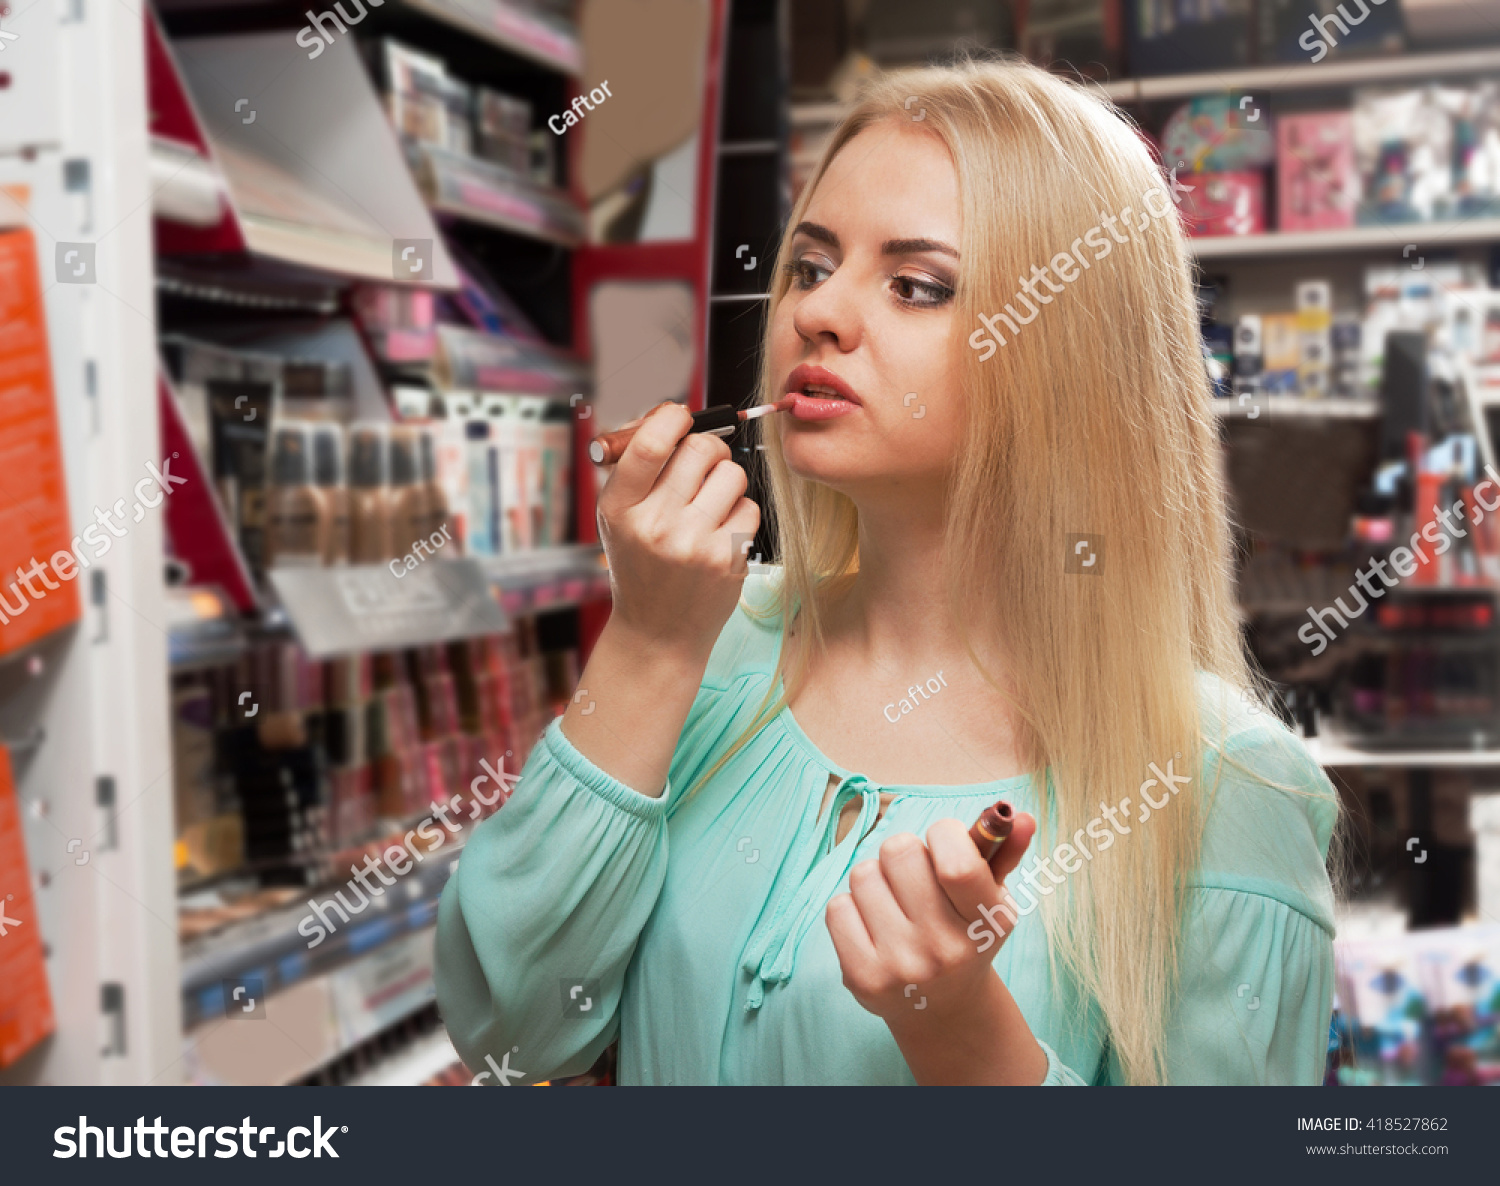 Portrait of smiling young blondie selecting lip gloss in store #418527862